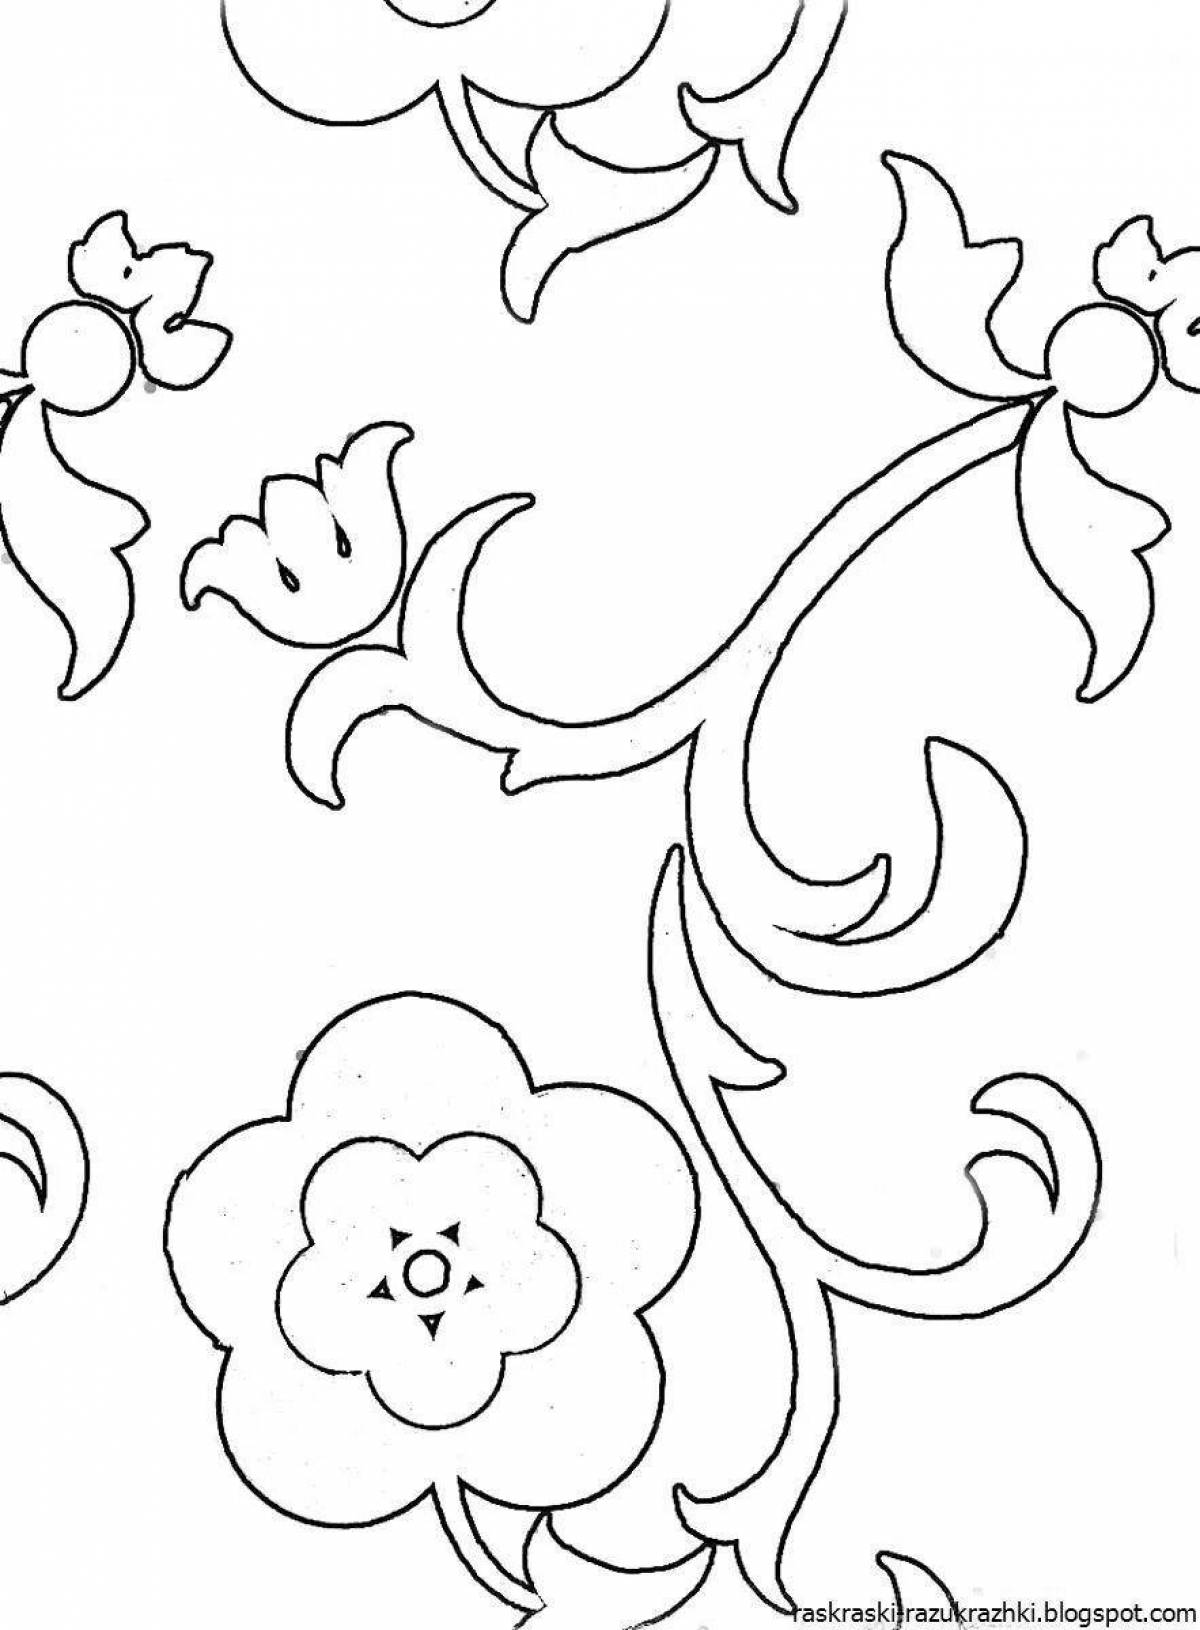 Coloring page intricate tatar patterns